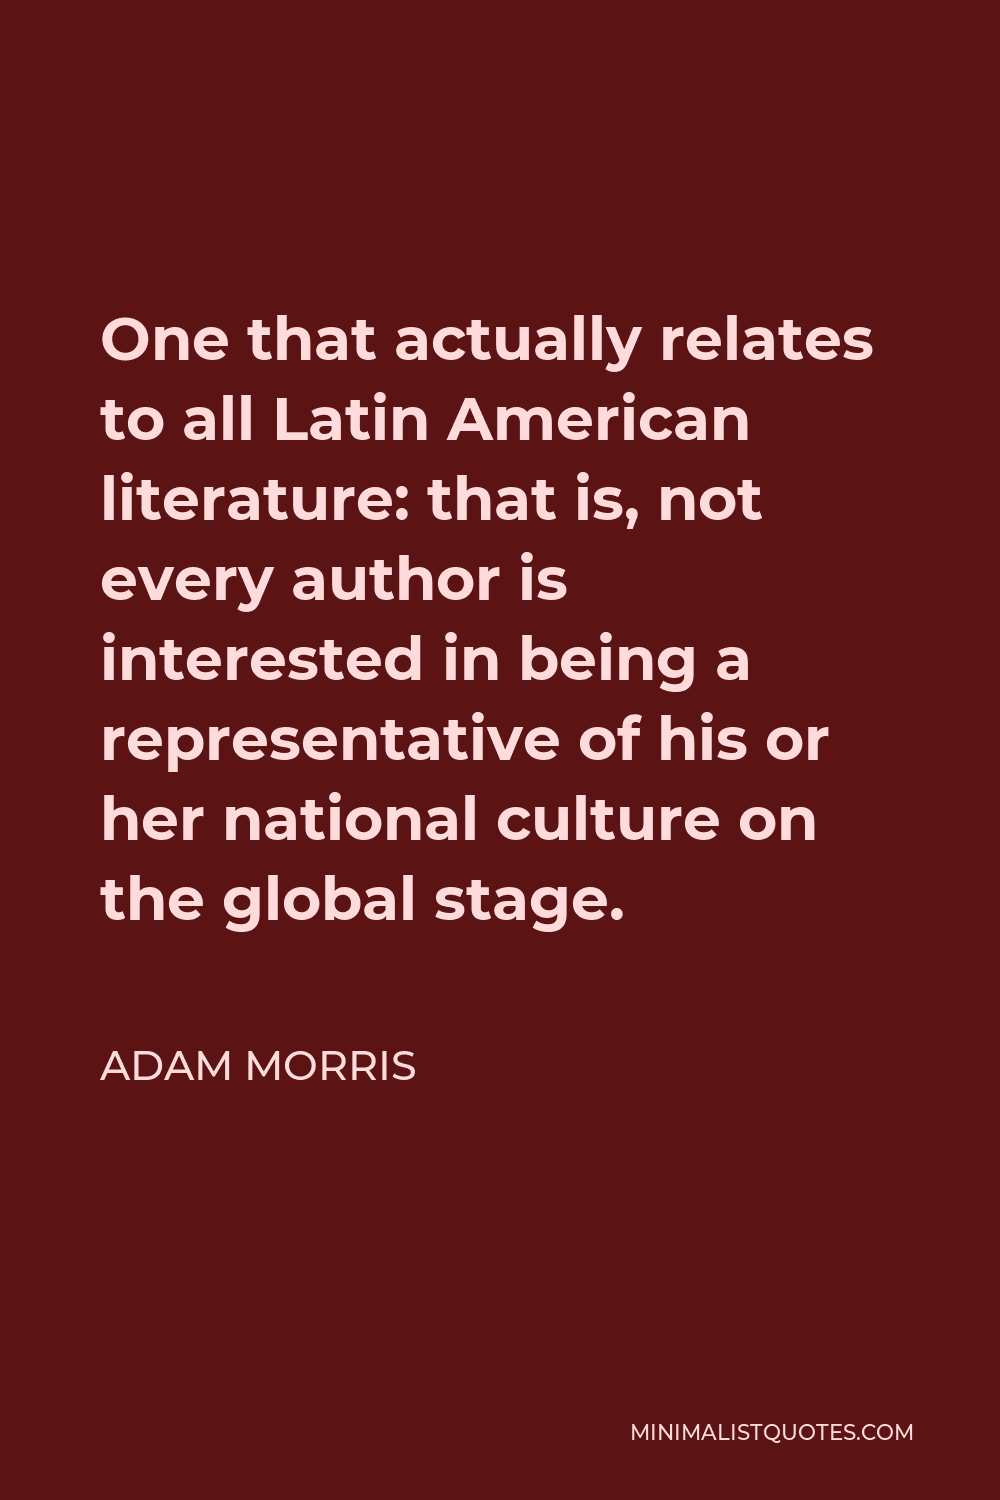 Adam Morris Quote - One that actually relates to all Latin American literature: that is, not every author is interested in being a representative of his or her national culture on the global stage.